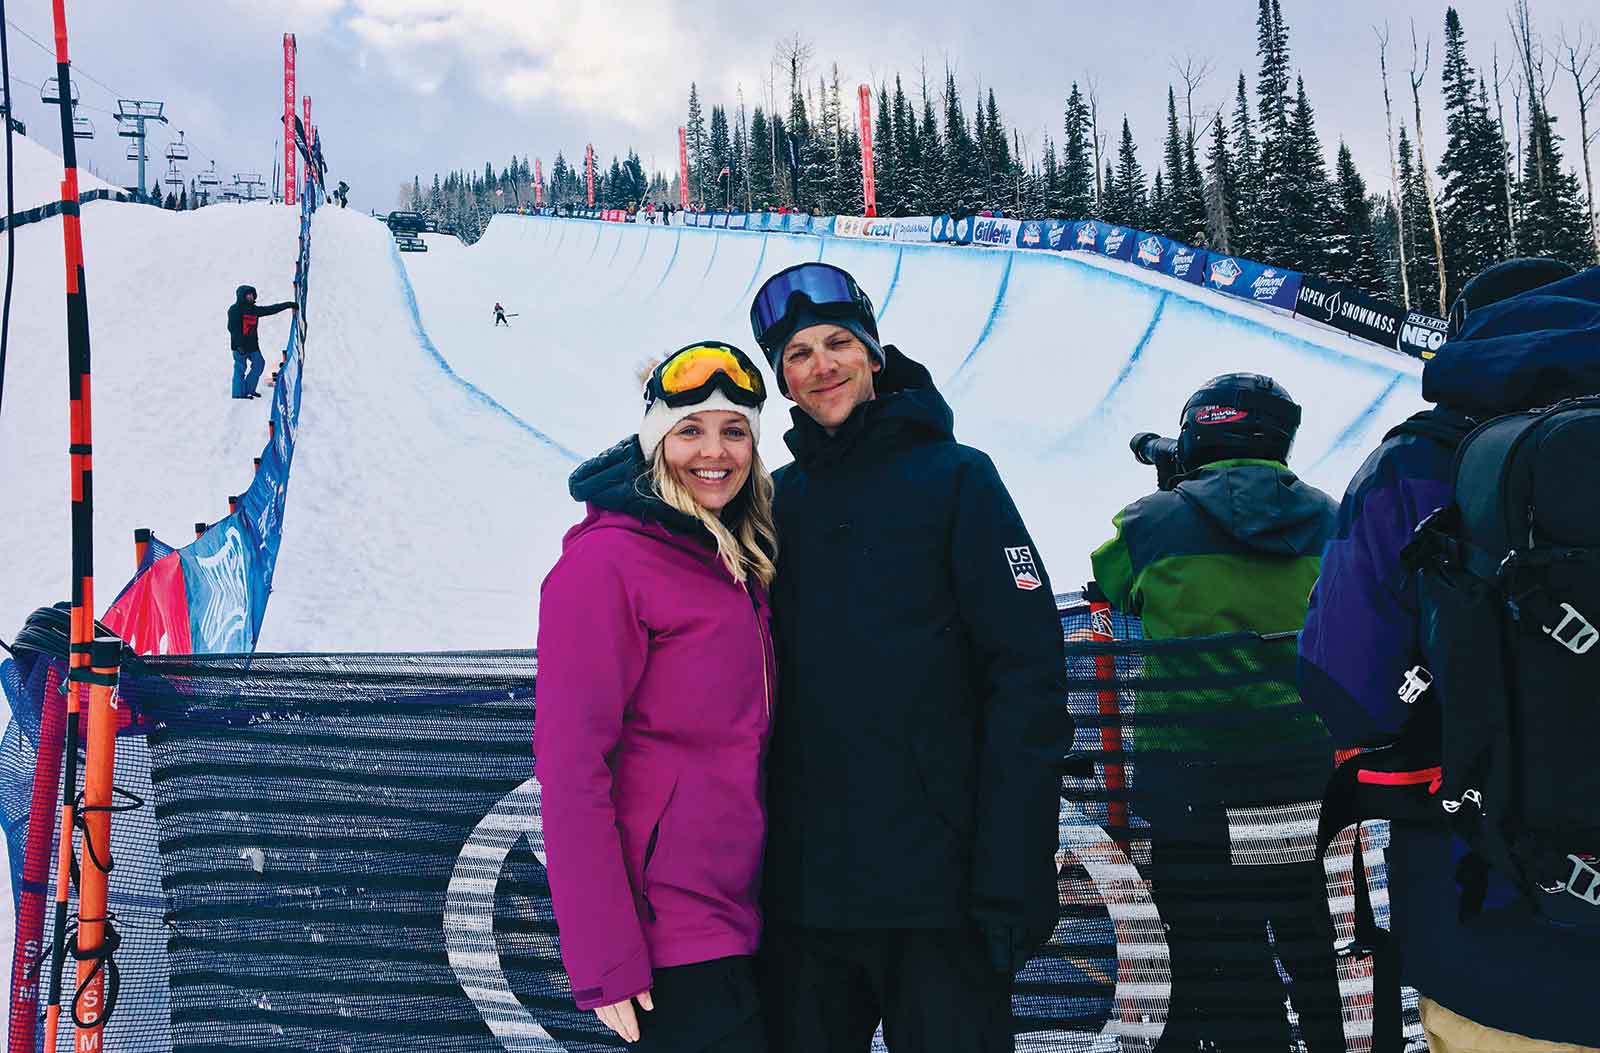 Jake Ingle and his wife, Clare, prepare to watch one of the fruits of Jake’s labor——the Grand Prix super-pipe event in Snowmass, Co.